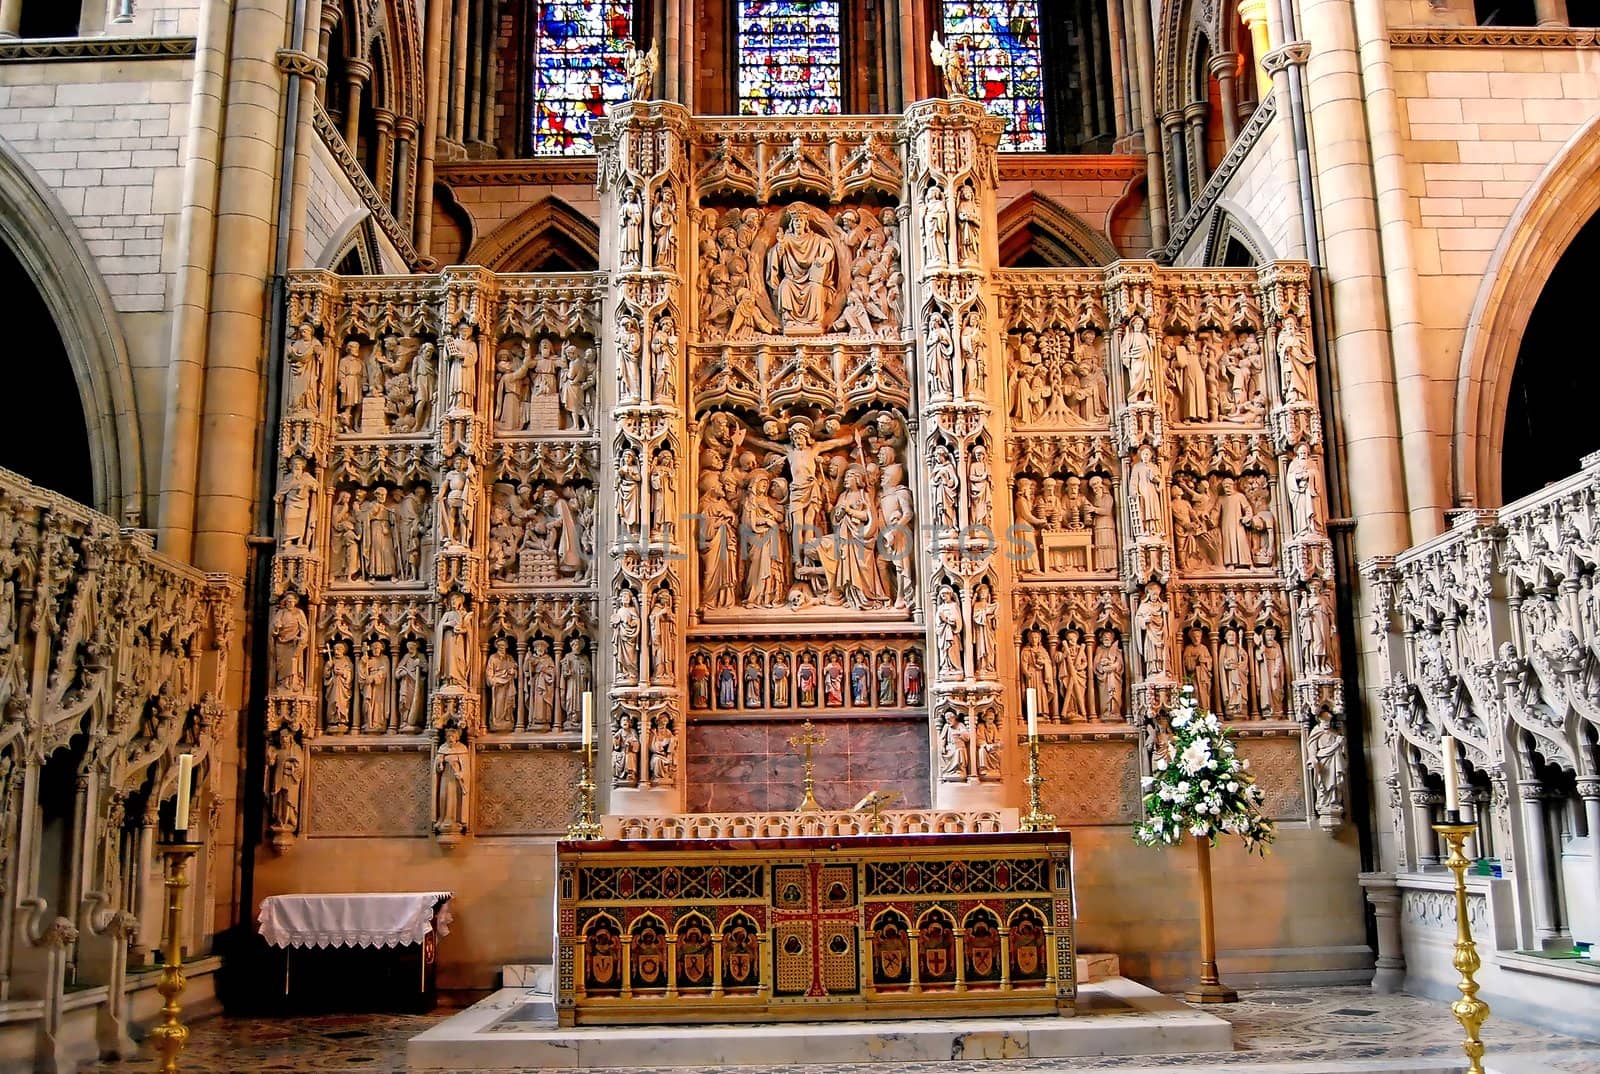 Cathedral Altar with Beautiful Carvings and Stained Glass